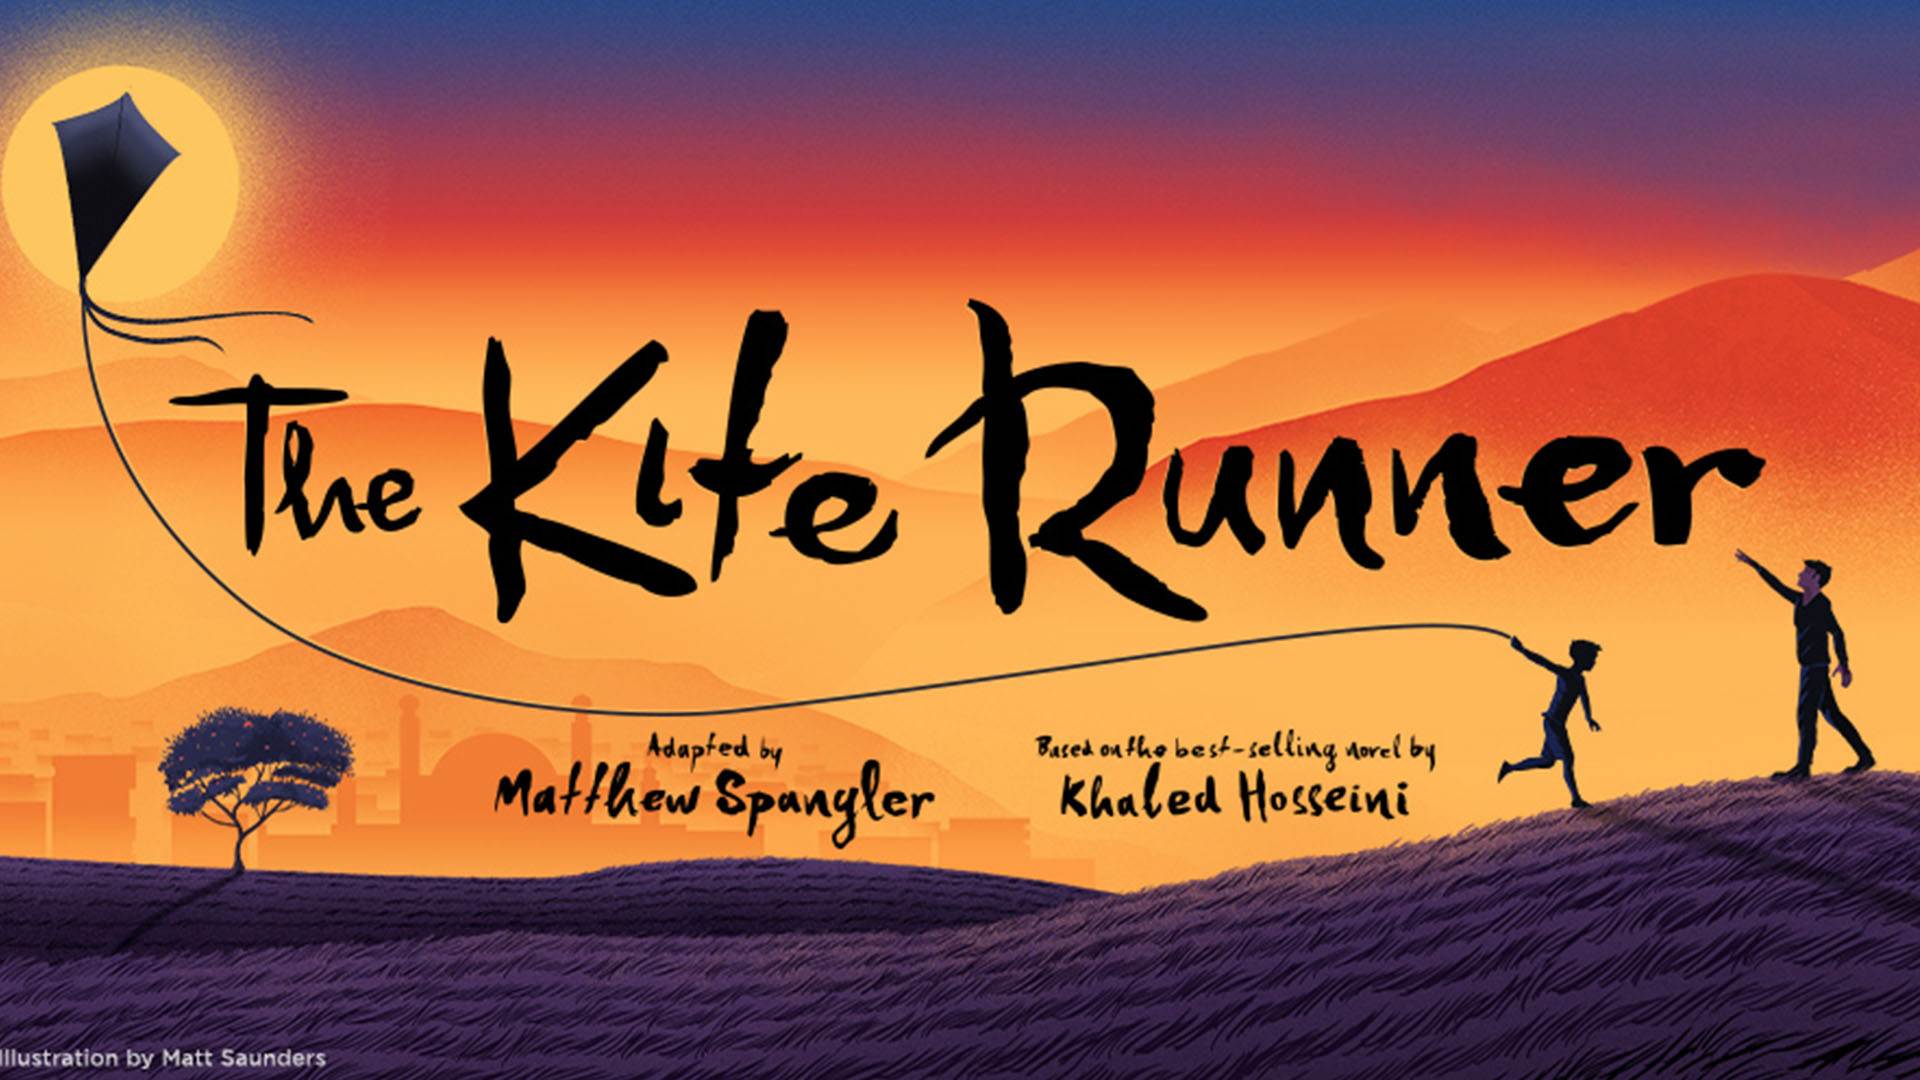 Banner reads: "The Kite Runner. Adapted by Matthew Spangler. Based on the best-selling novel by Khaled Hasseini." An orange sunset with hills and a tree with the silhouettes of two young boys flying a kite.